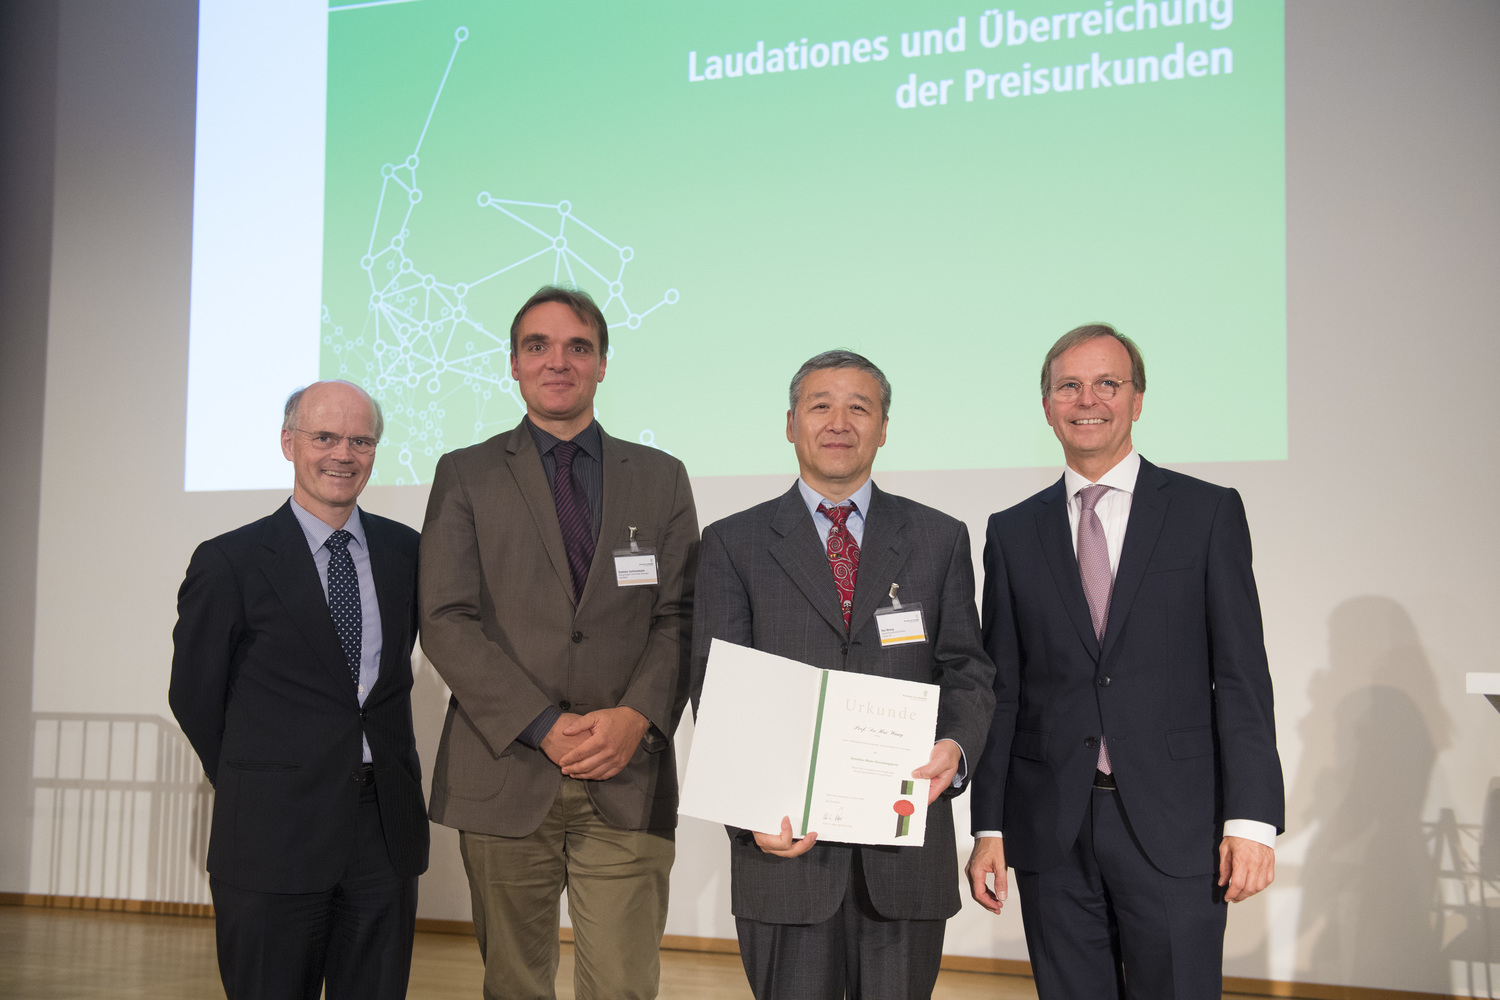 Award Winner Professor Wang Hui (second from right) with (from left) Dr. Enno Aufderheide (Humboldt Foundation), Professor Dominic Sachsenmaier (University of Göttingen) and Thomas Rachel (Federal Ministry of Education and Research).